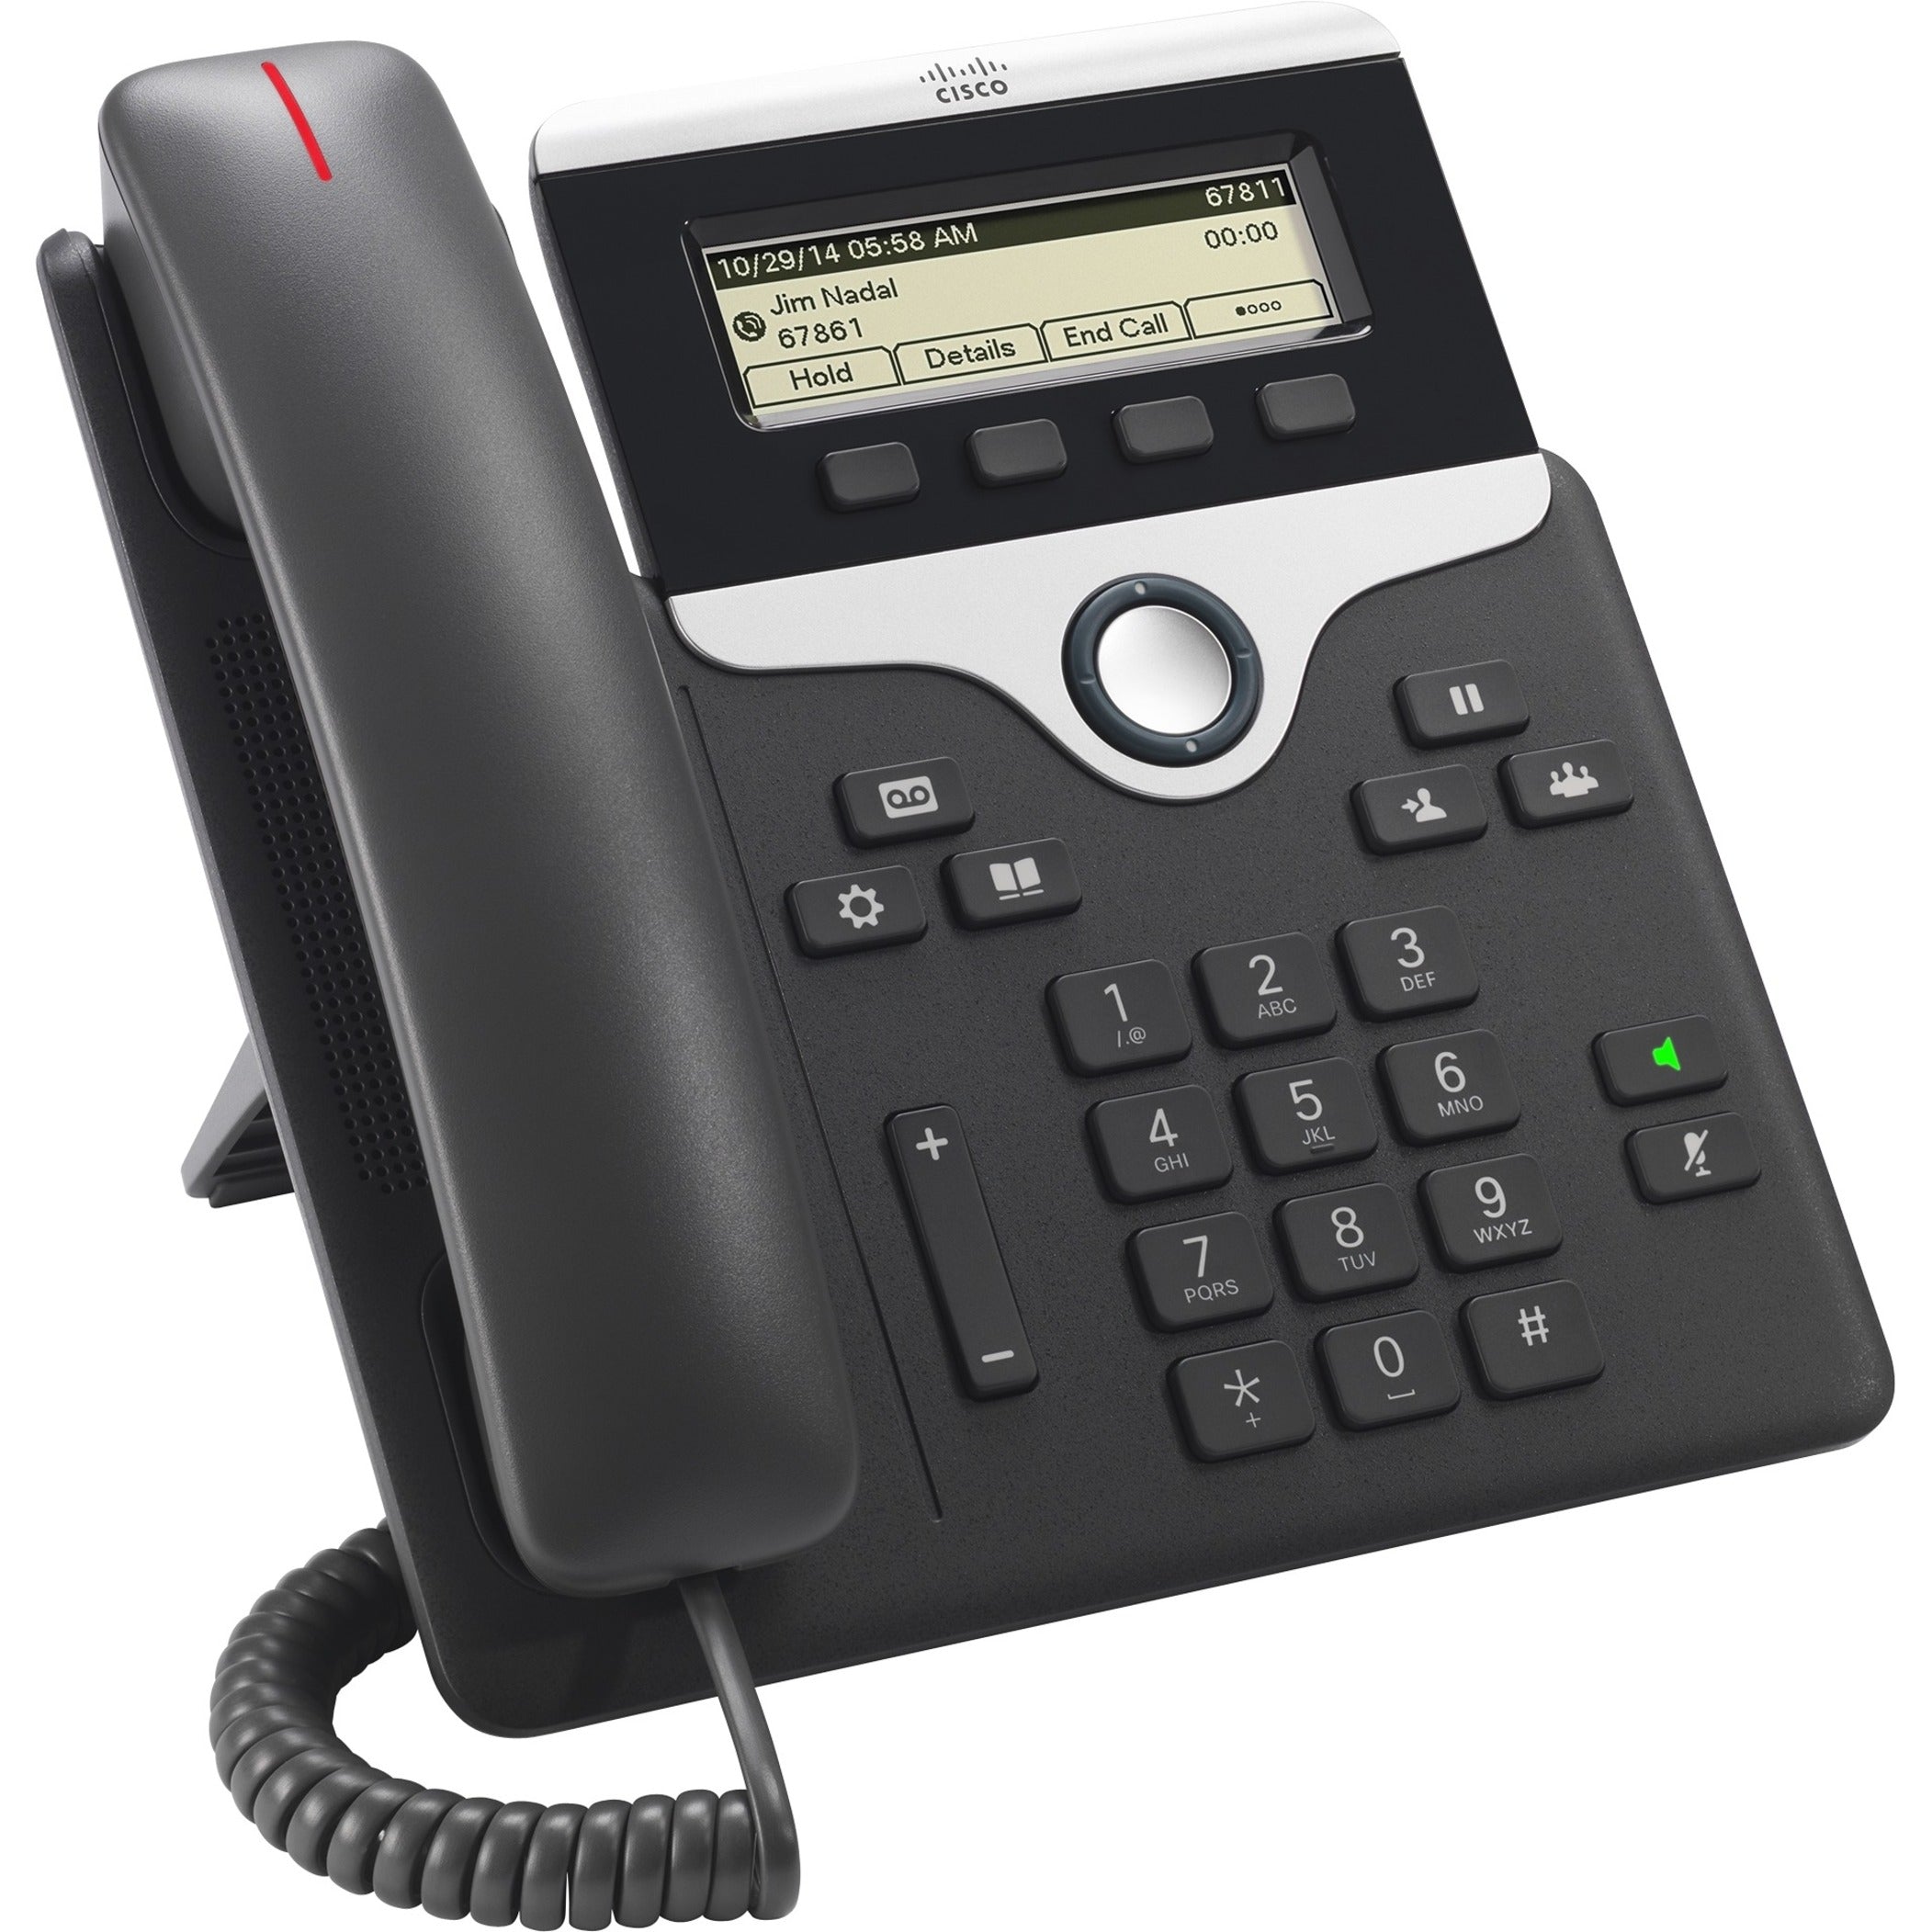 Cisco CP-7811-3PCC-K9= IP Phone 7811 for 3rd Party Call Control, Monochrome Display, Caller ID, Speakerphone